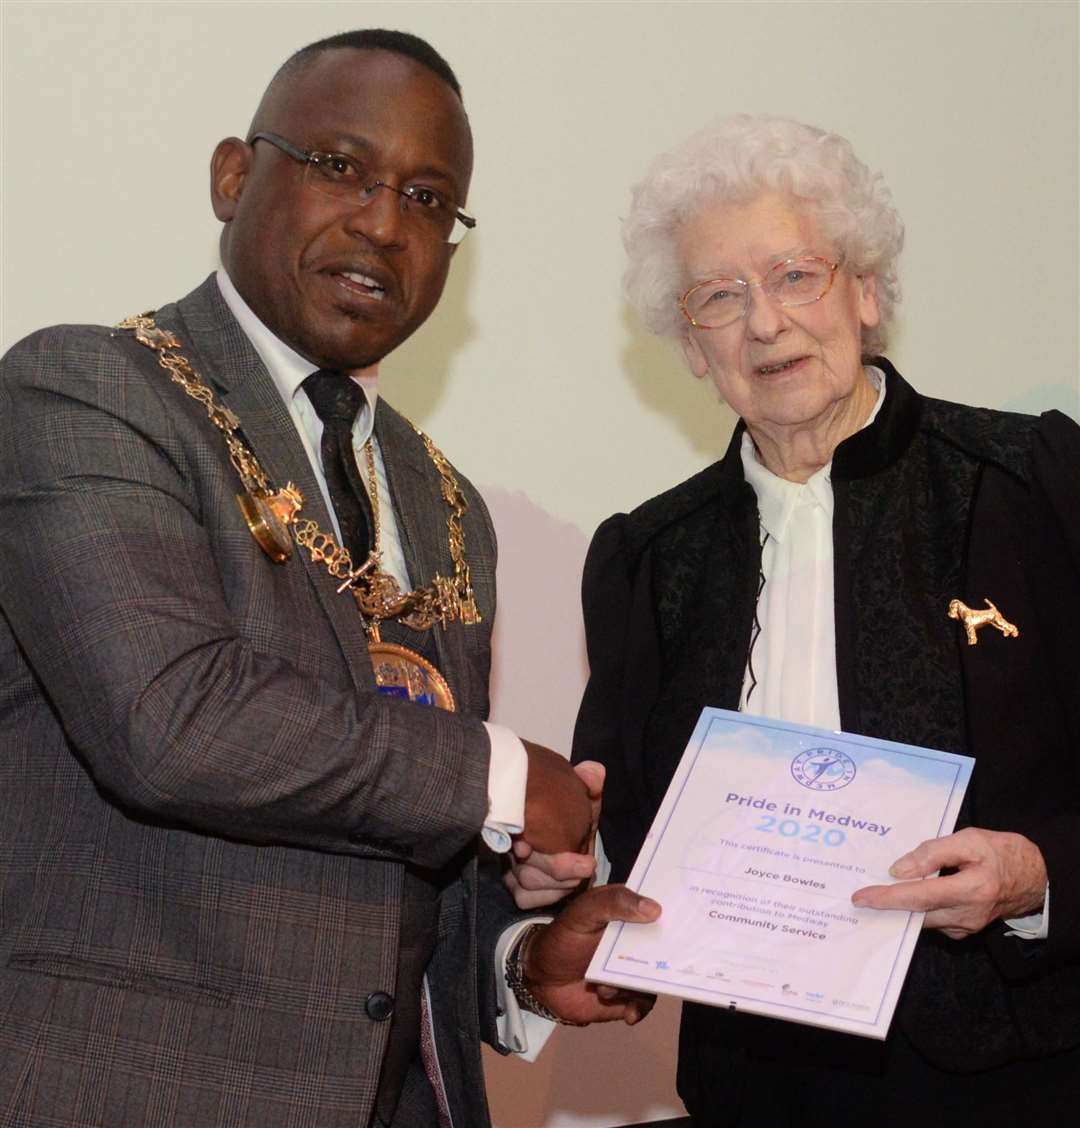 Mayor Cllr Habib Tejan presents Joyce Bowles with her certificate at the Pride in Medway Awards in 2020